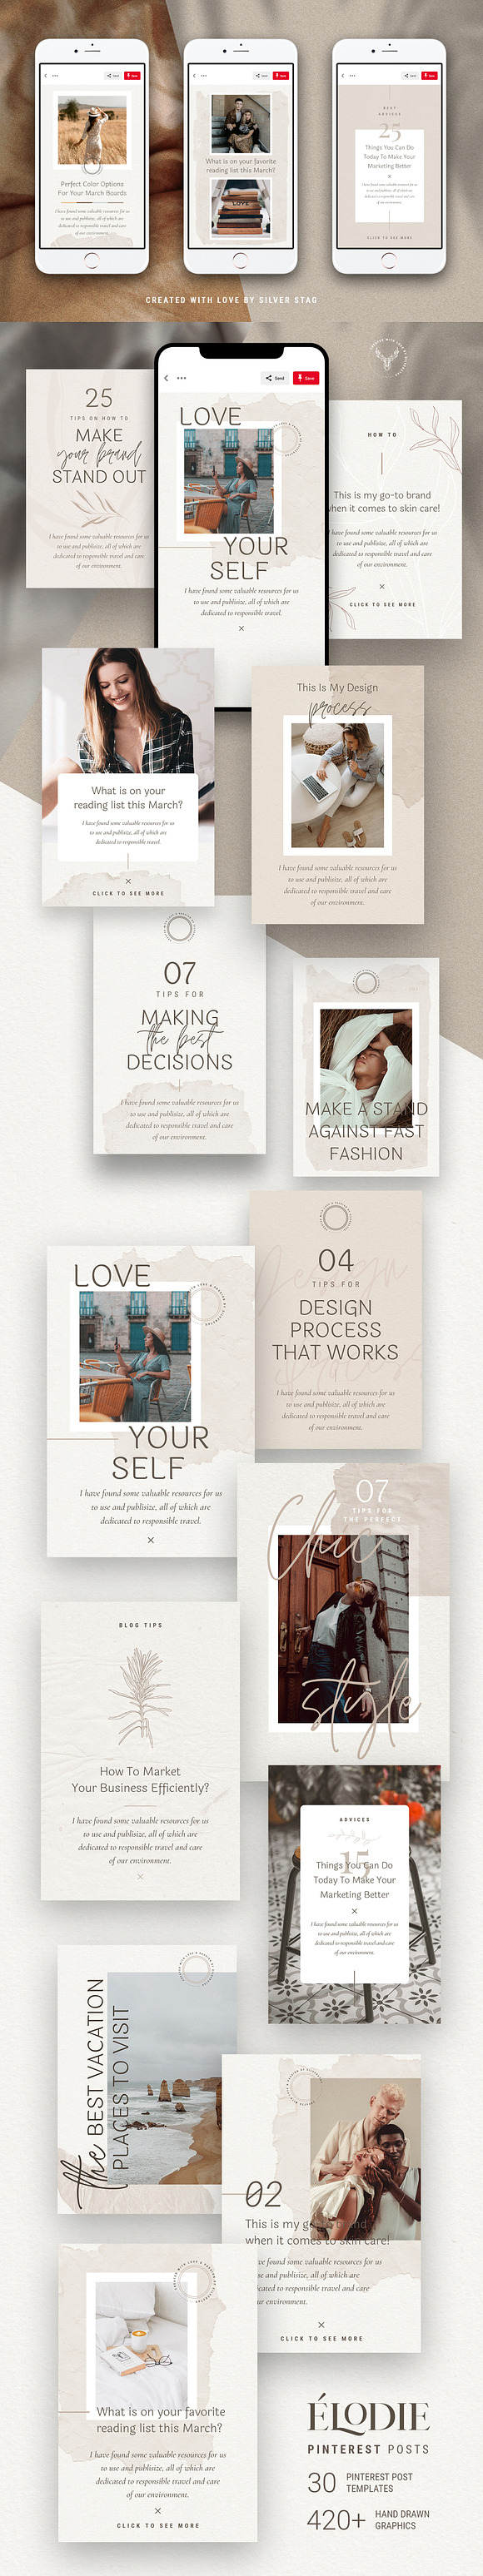 Elodie - Canva Pinterest Templates in Pinterest Templates - product preview 20